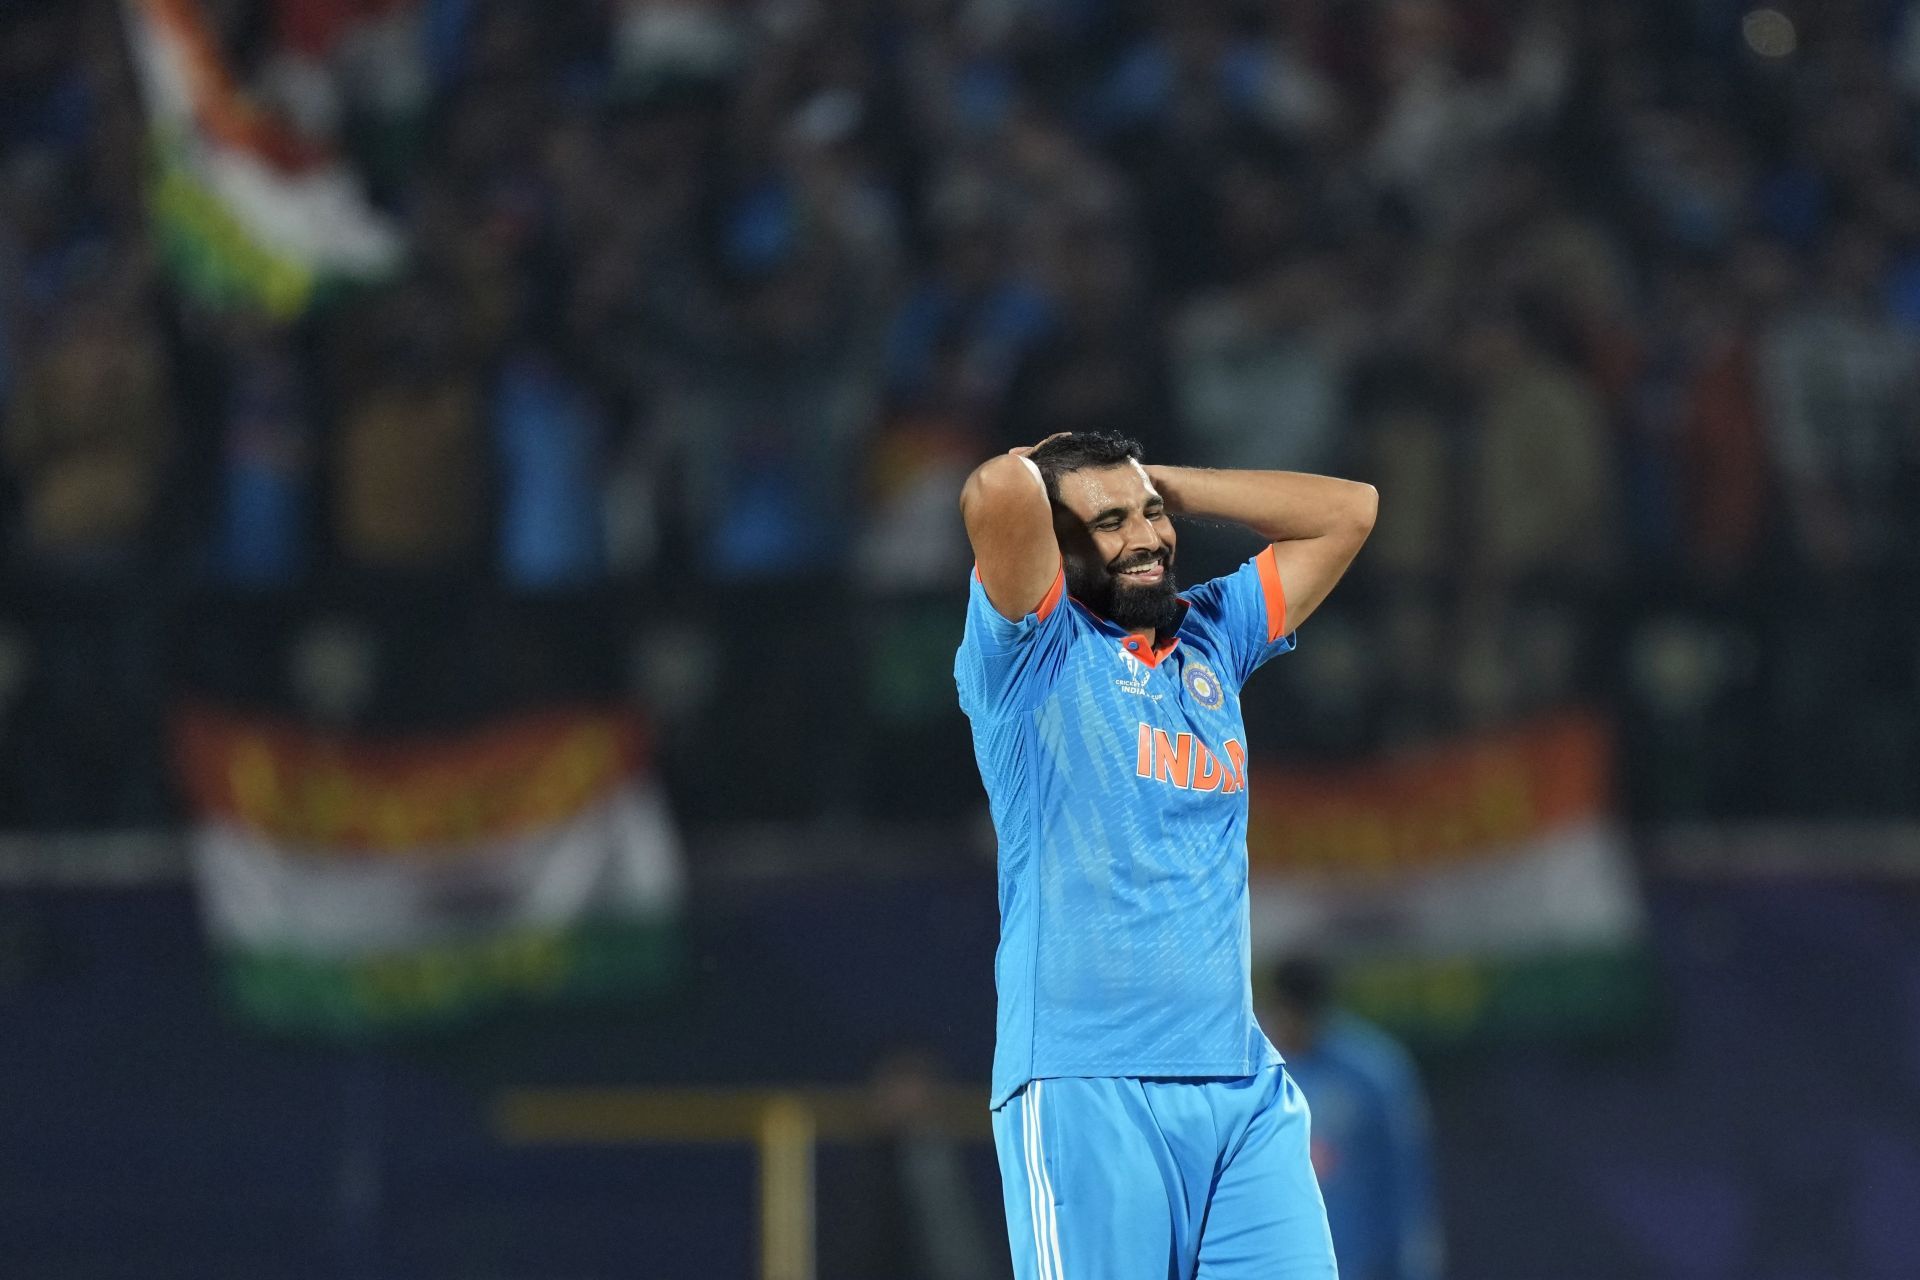 Mohammed Shami has been in red-hot form for Team India